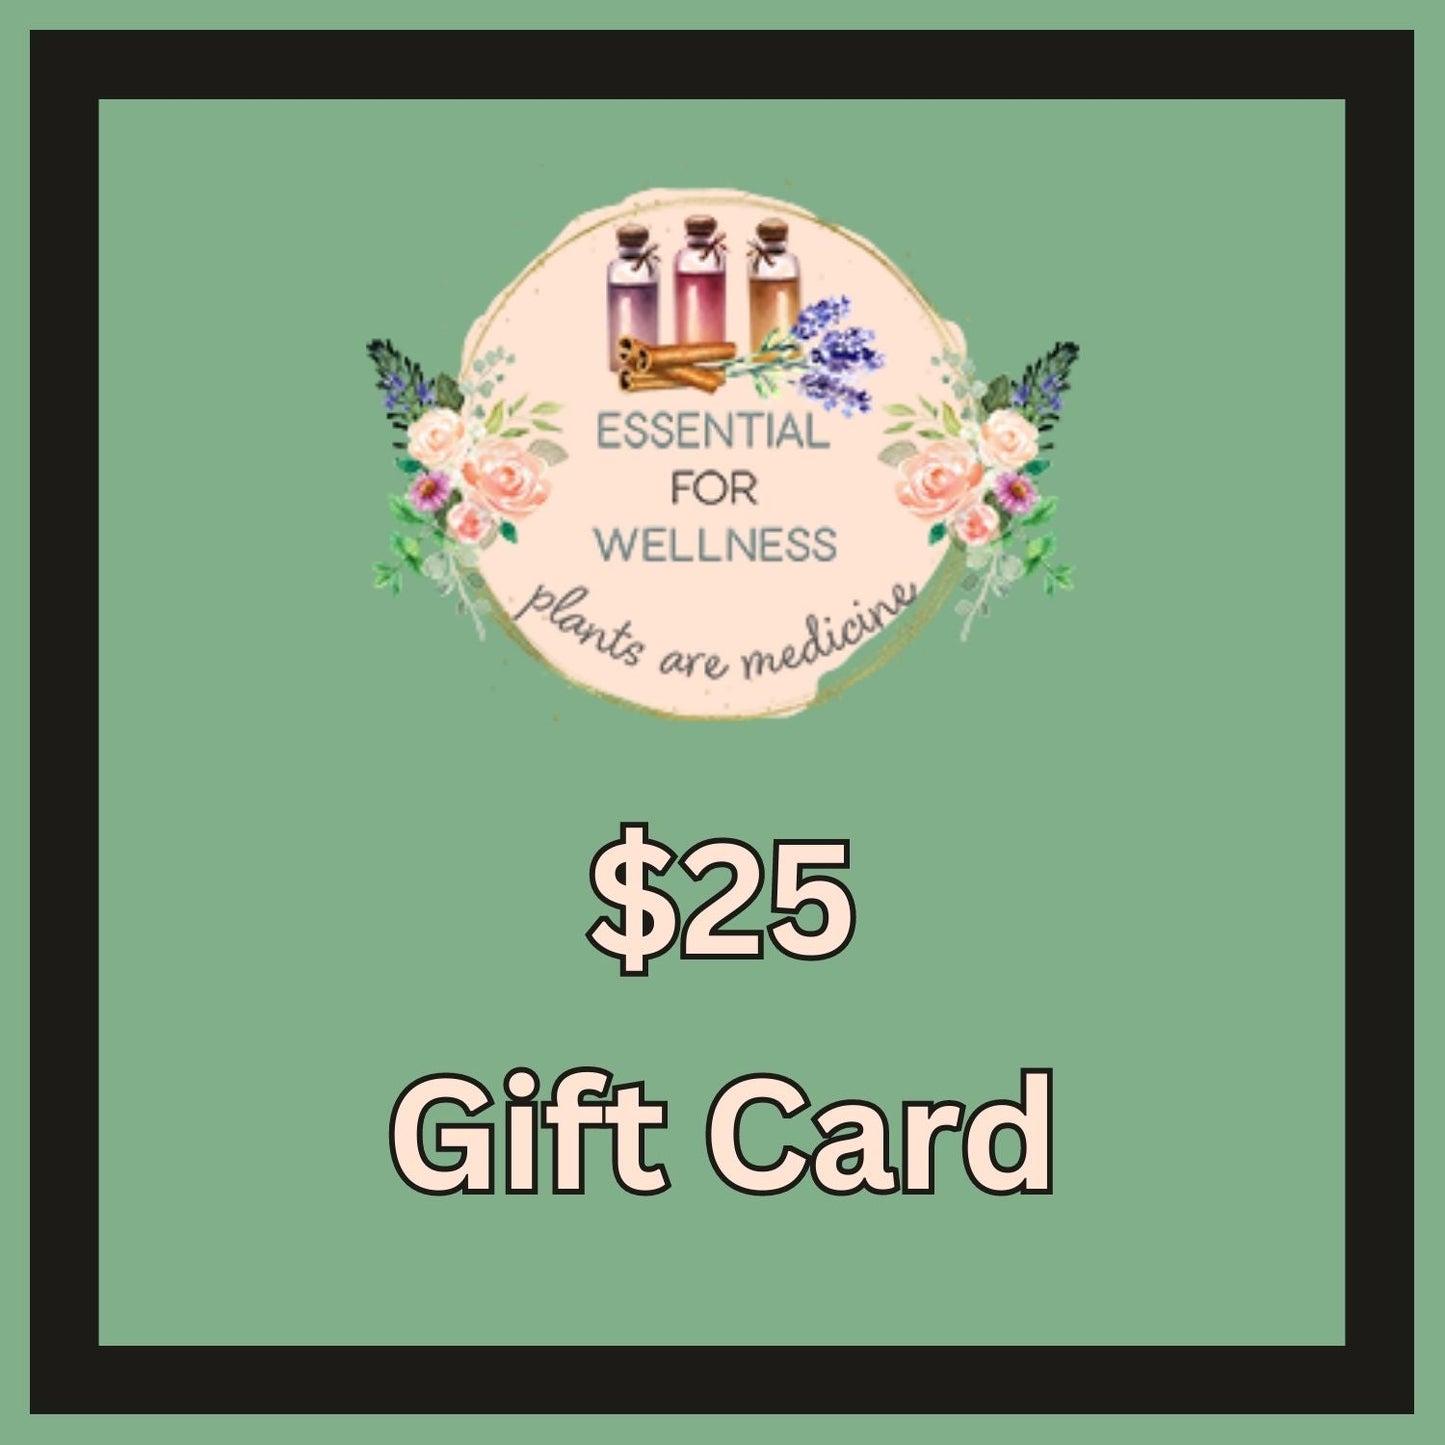 Essential for Wellness™ Gift Card